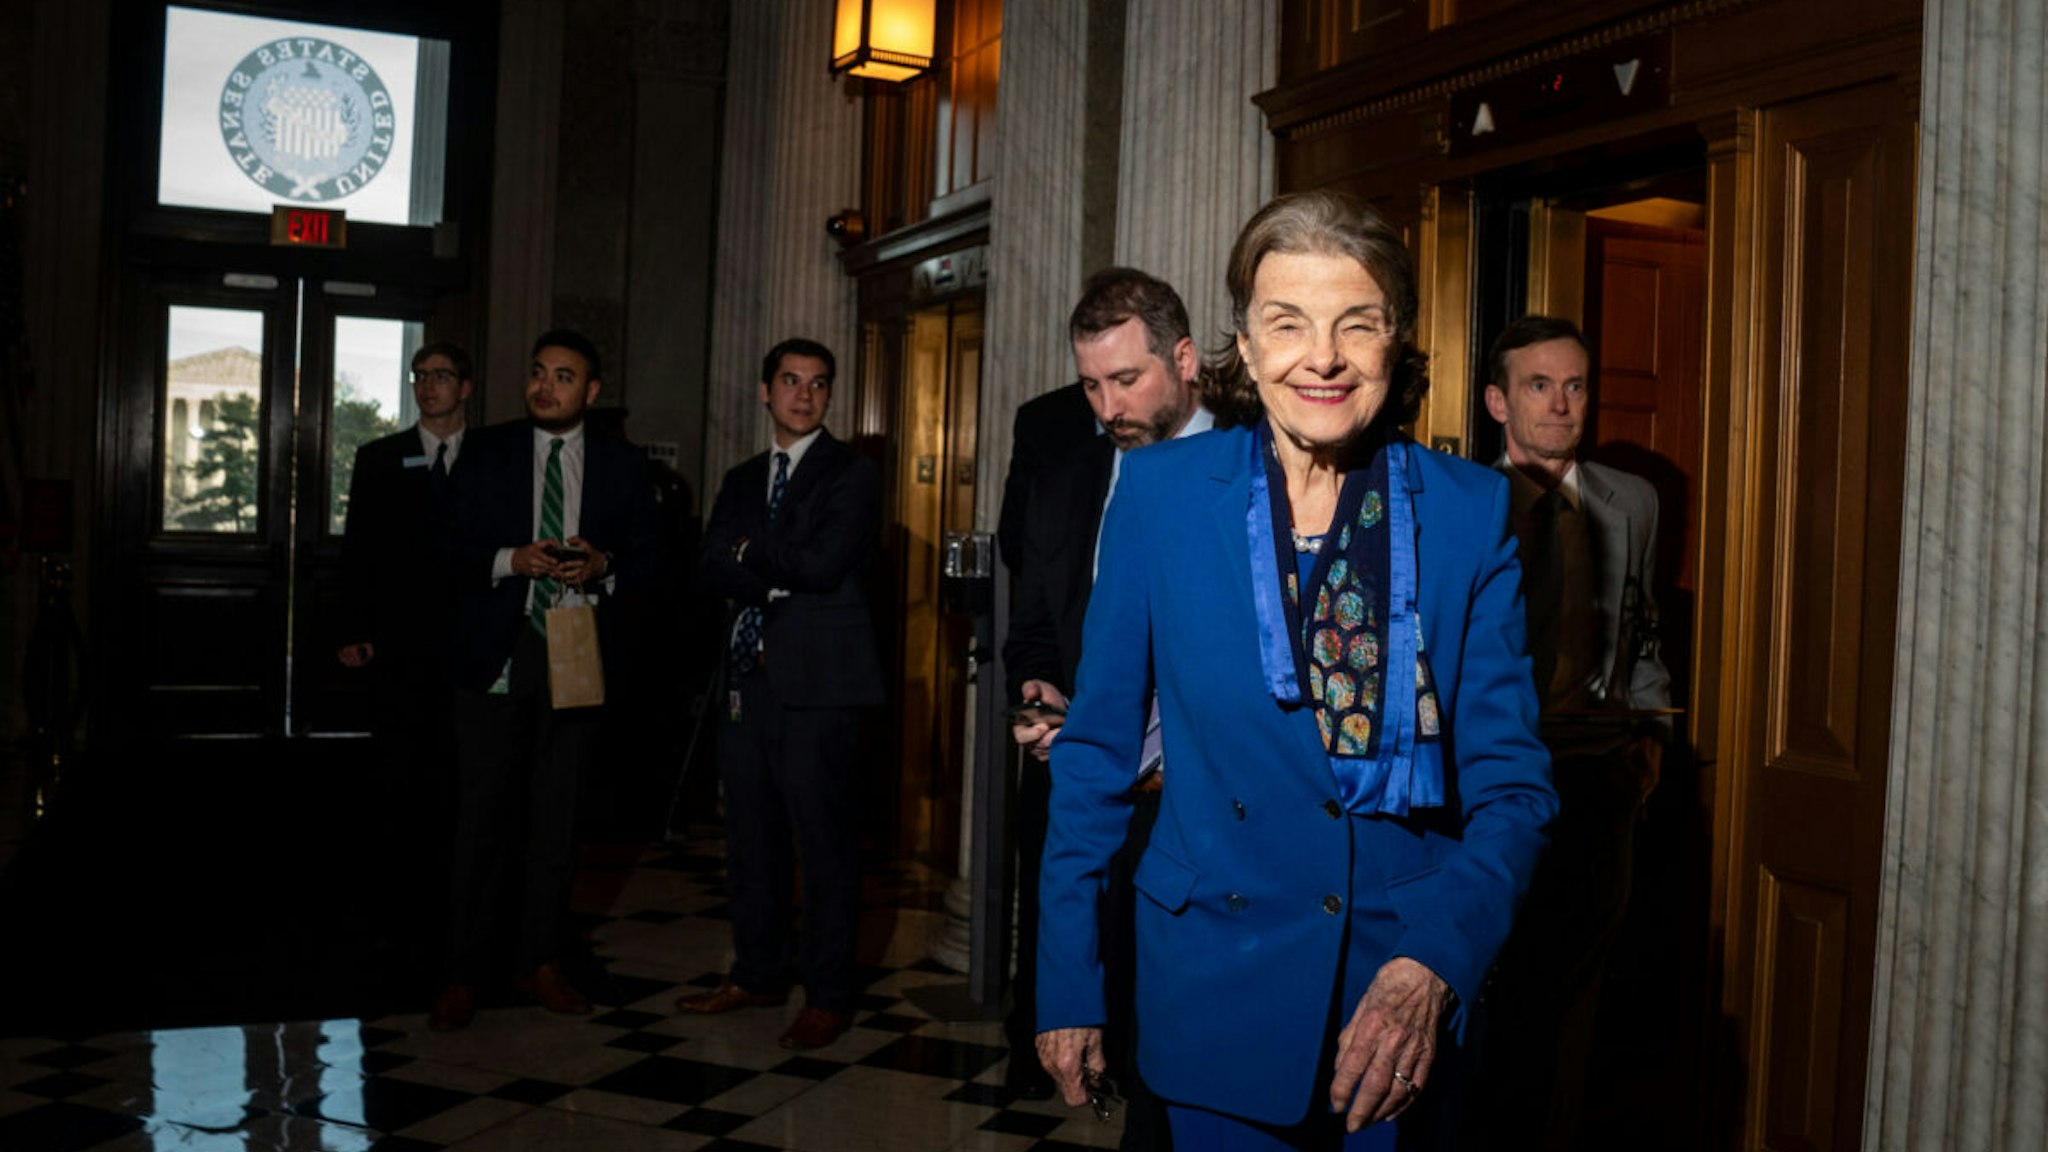 Sen. Dianne Feinstein (D-CA) arrives at the Senate Chamber for a vote at the U.S. Capitol on Tuesday, Feb. 14, 2023 in Washington, DC.